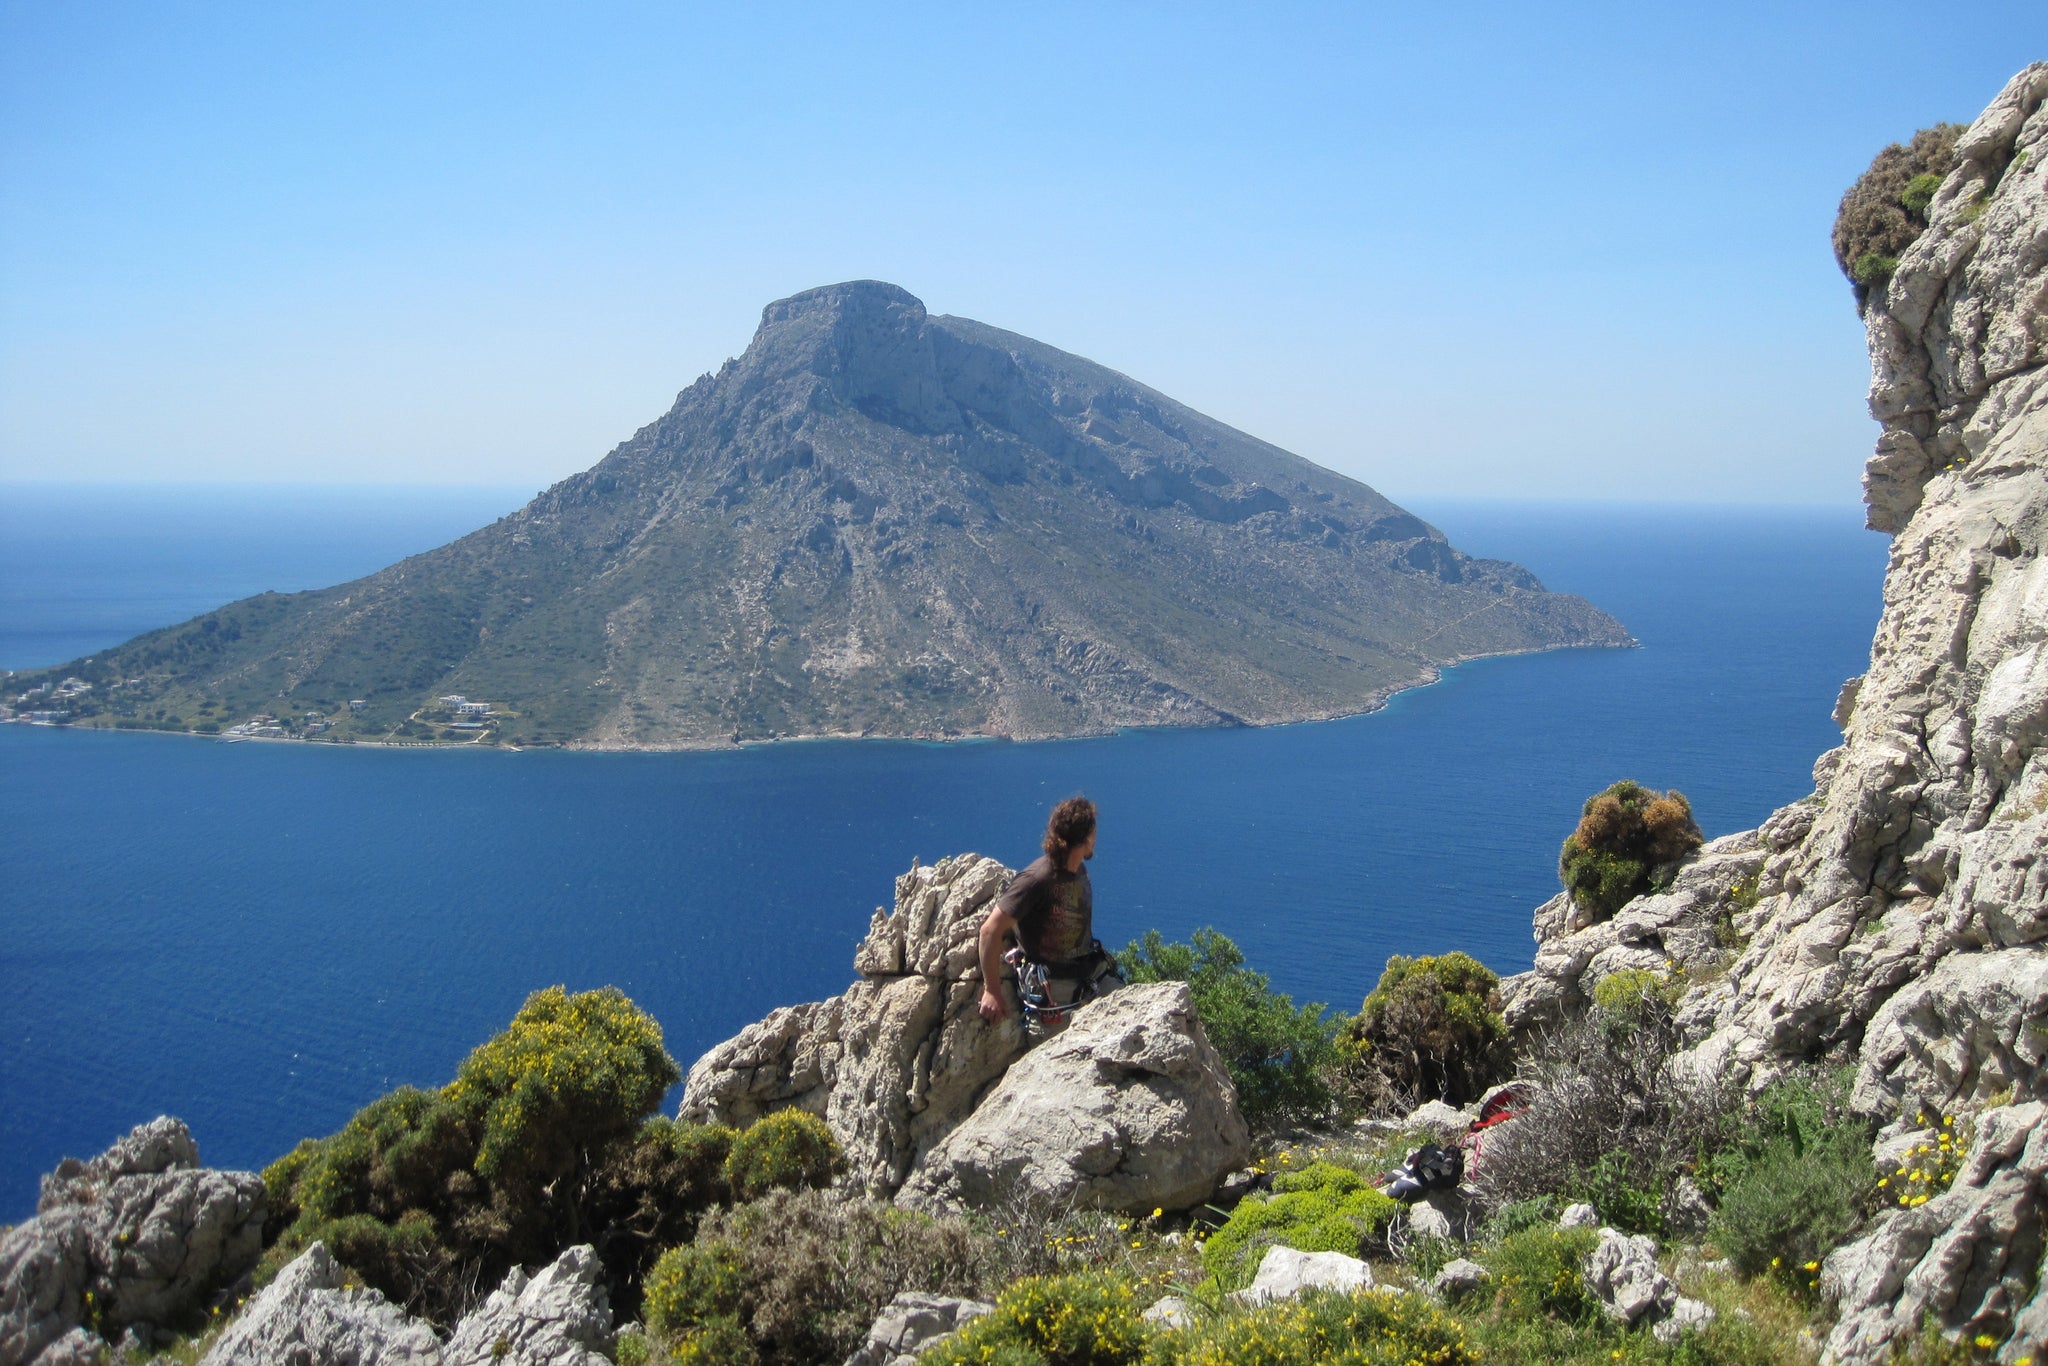 Pongoose founder Rob Rendall pictured in Kalymnos, Greece, in the sun with Telendos island and sea in background.